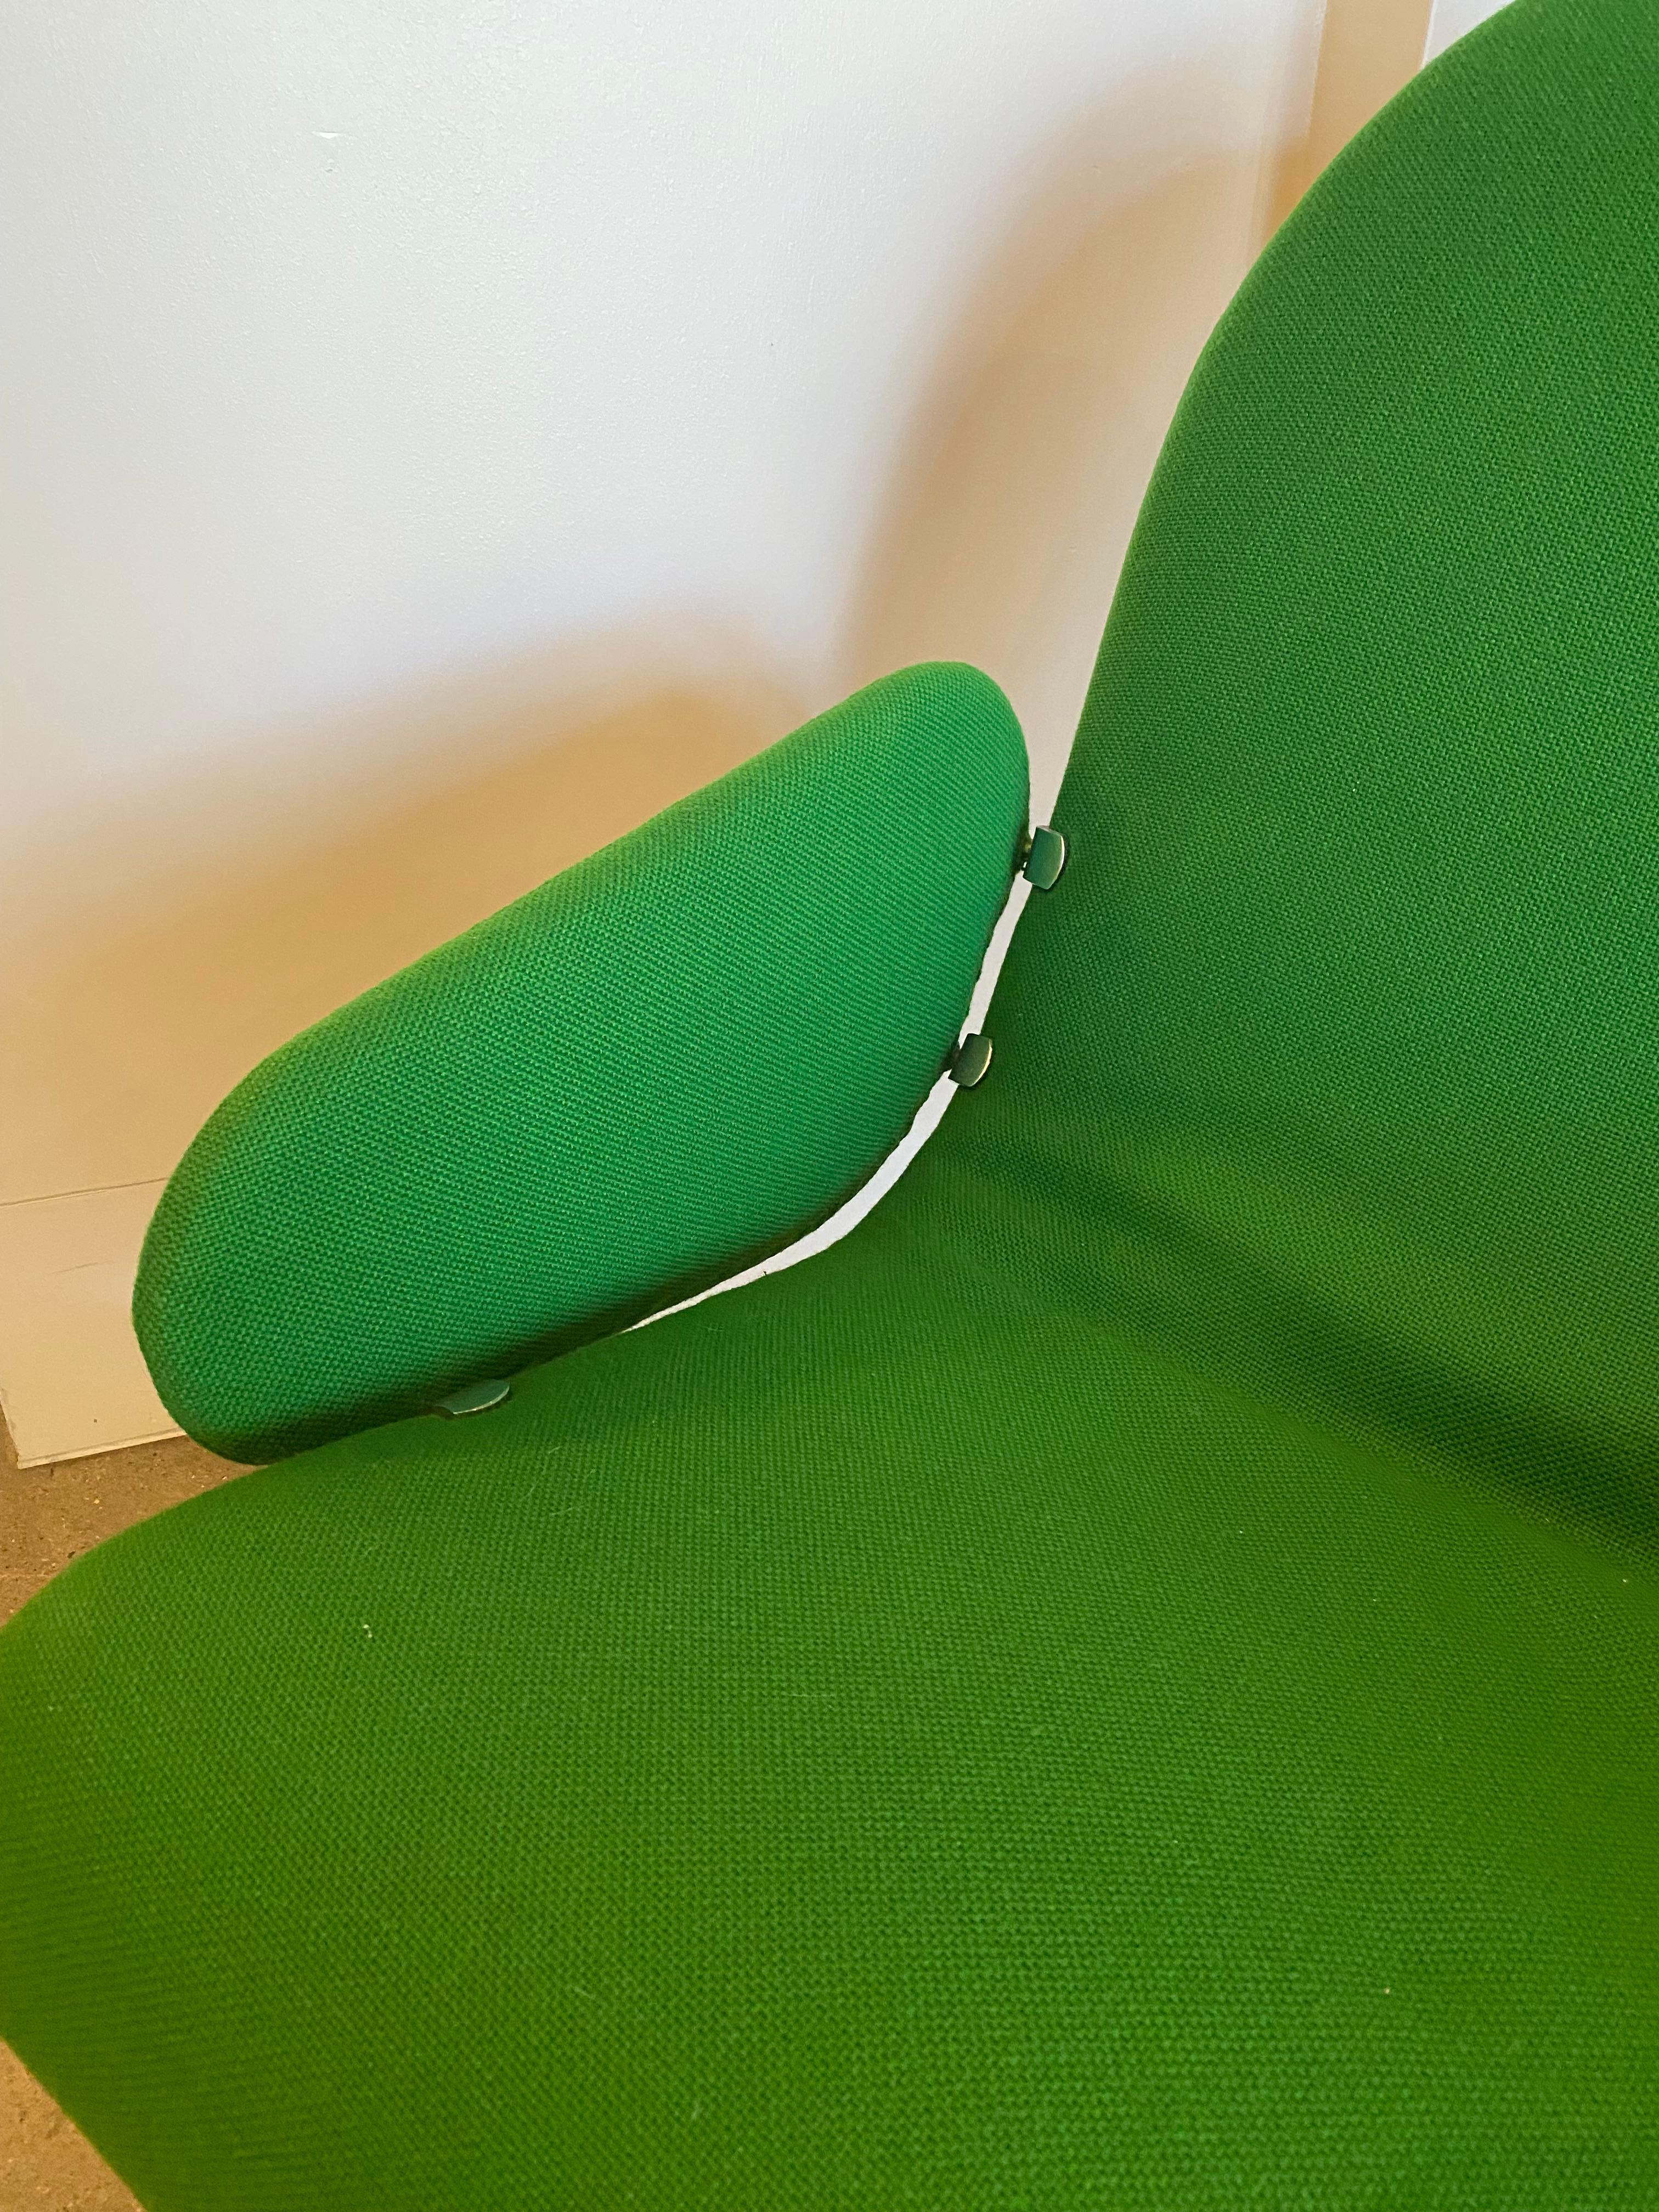 Lounge chair designed by Verner Panton in original green fabric with chrome trim and chrome swivel base. Classic Mid-Century Modern or Scandinavian modern styling. A comfortable chair and the original fabric is in almost perfect condition.